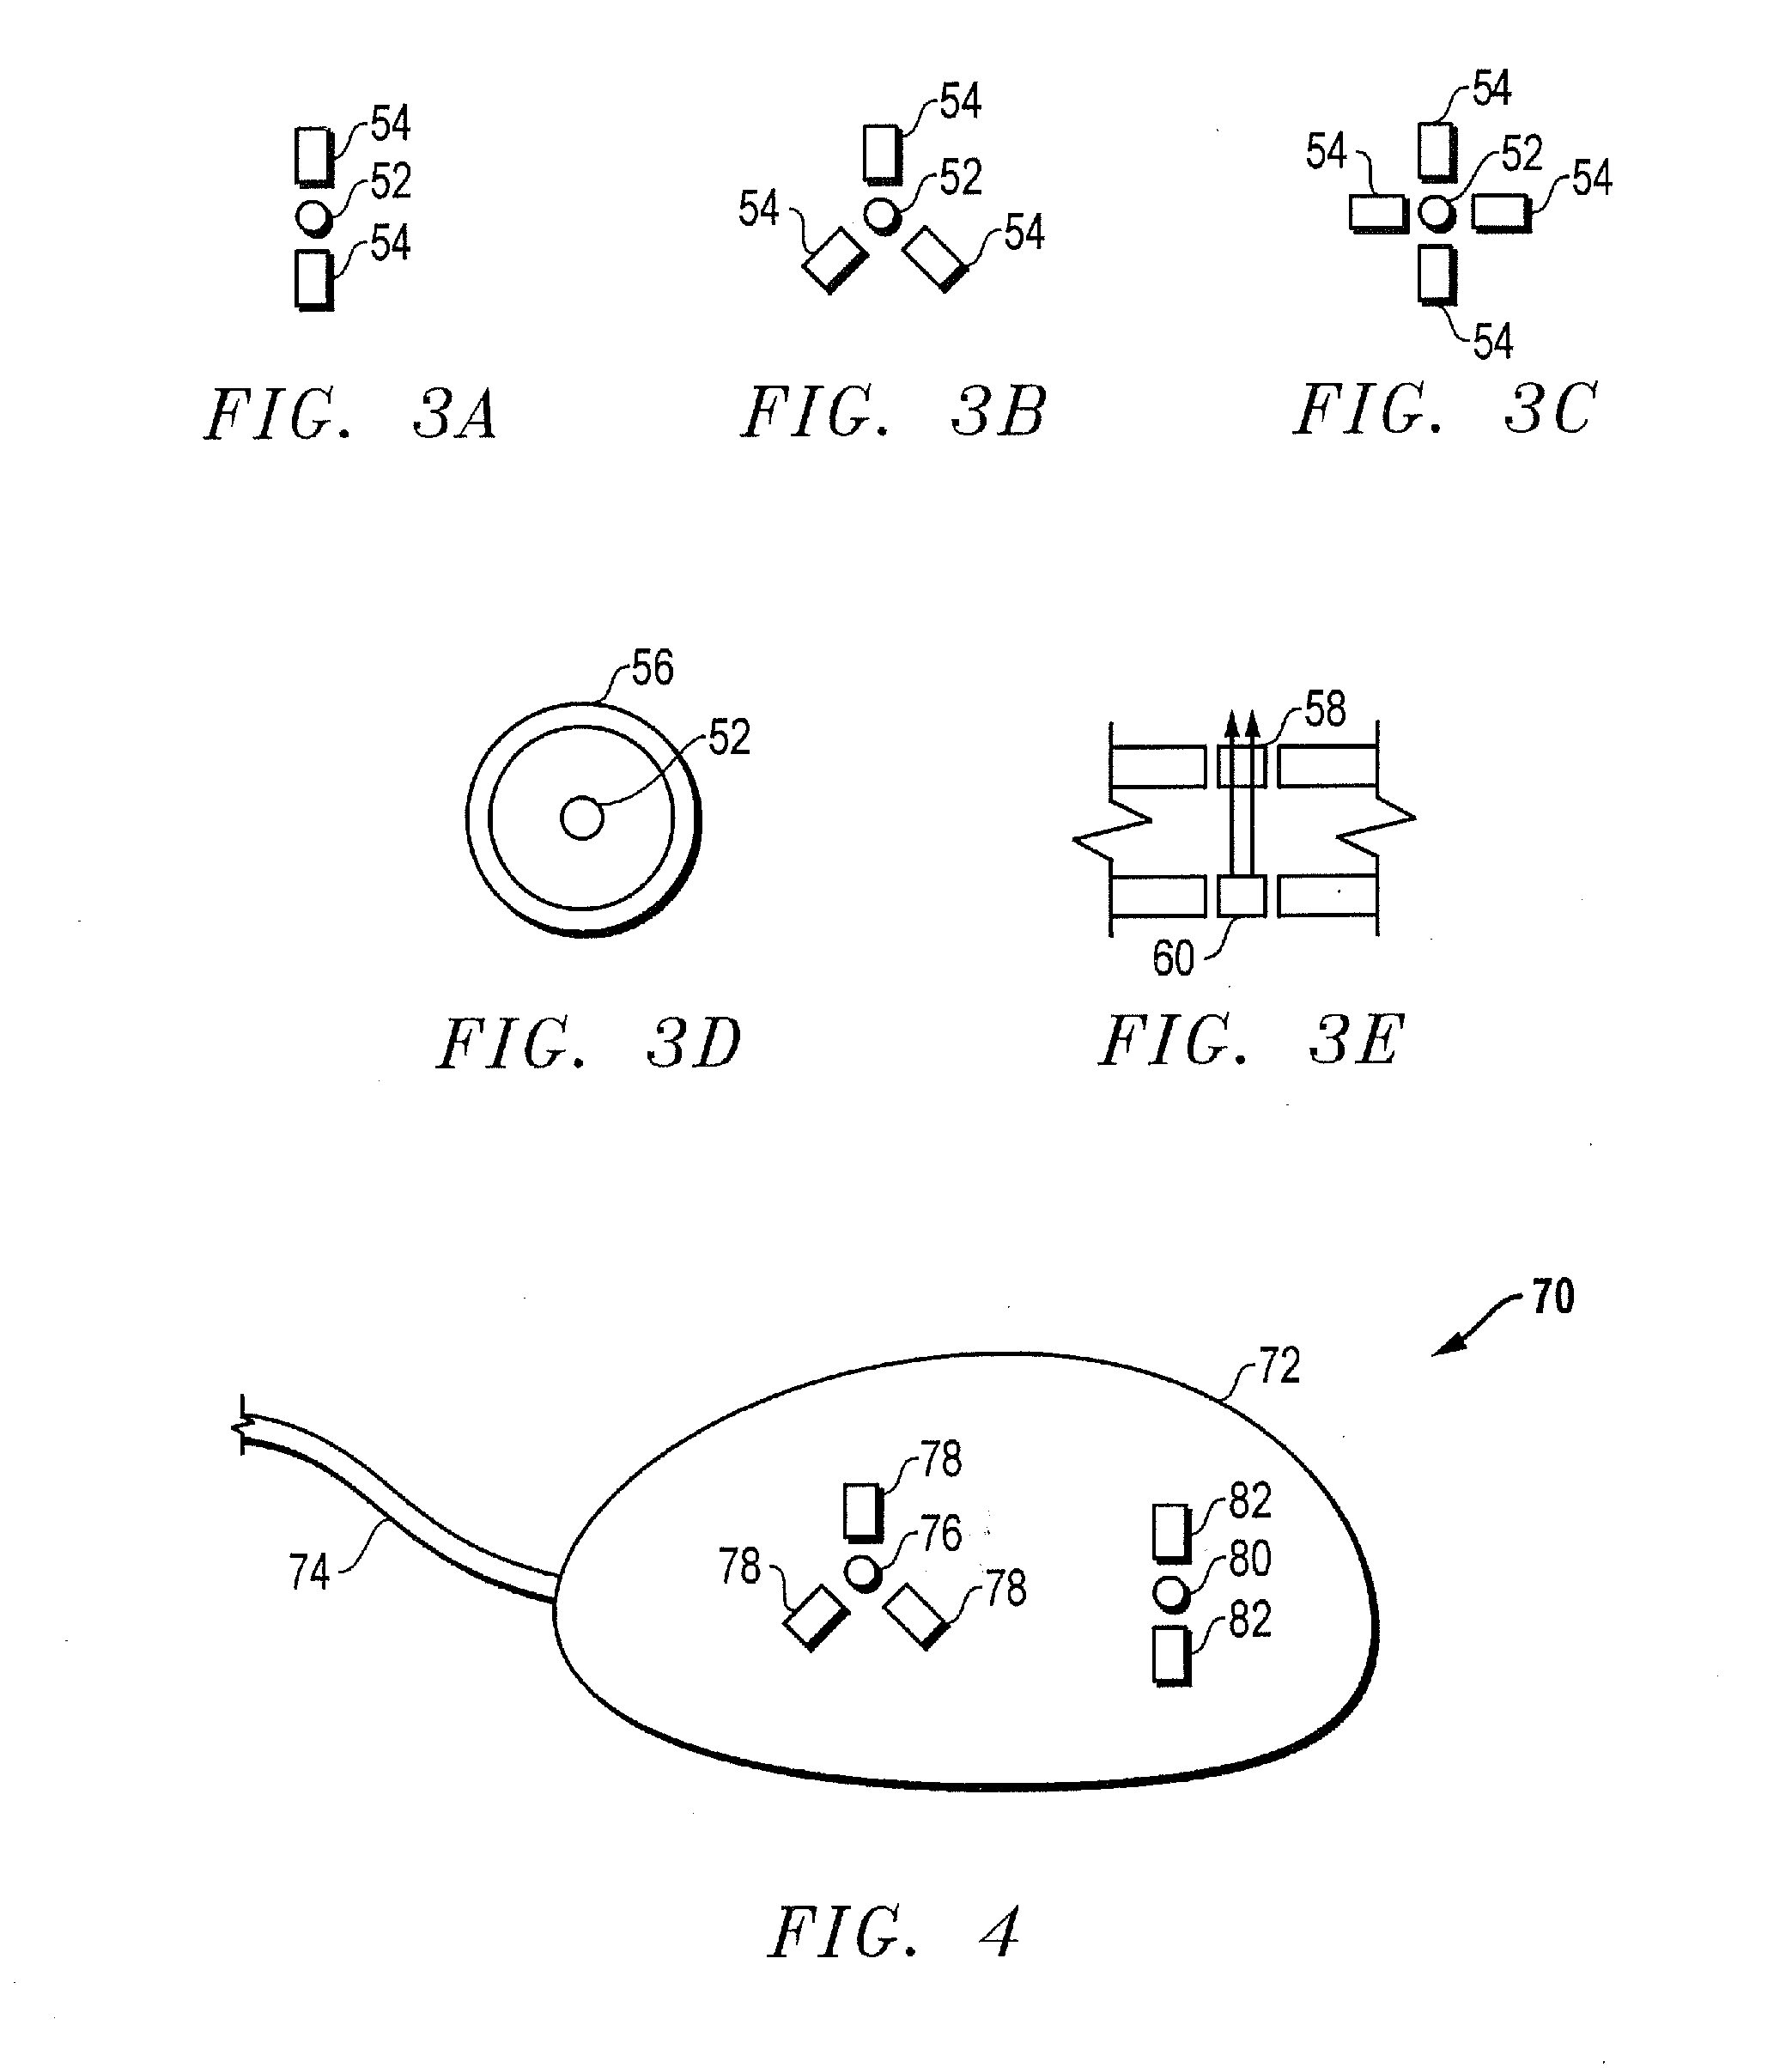 Access port indicator for implantable medical device